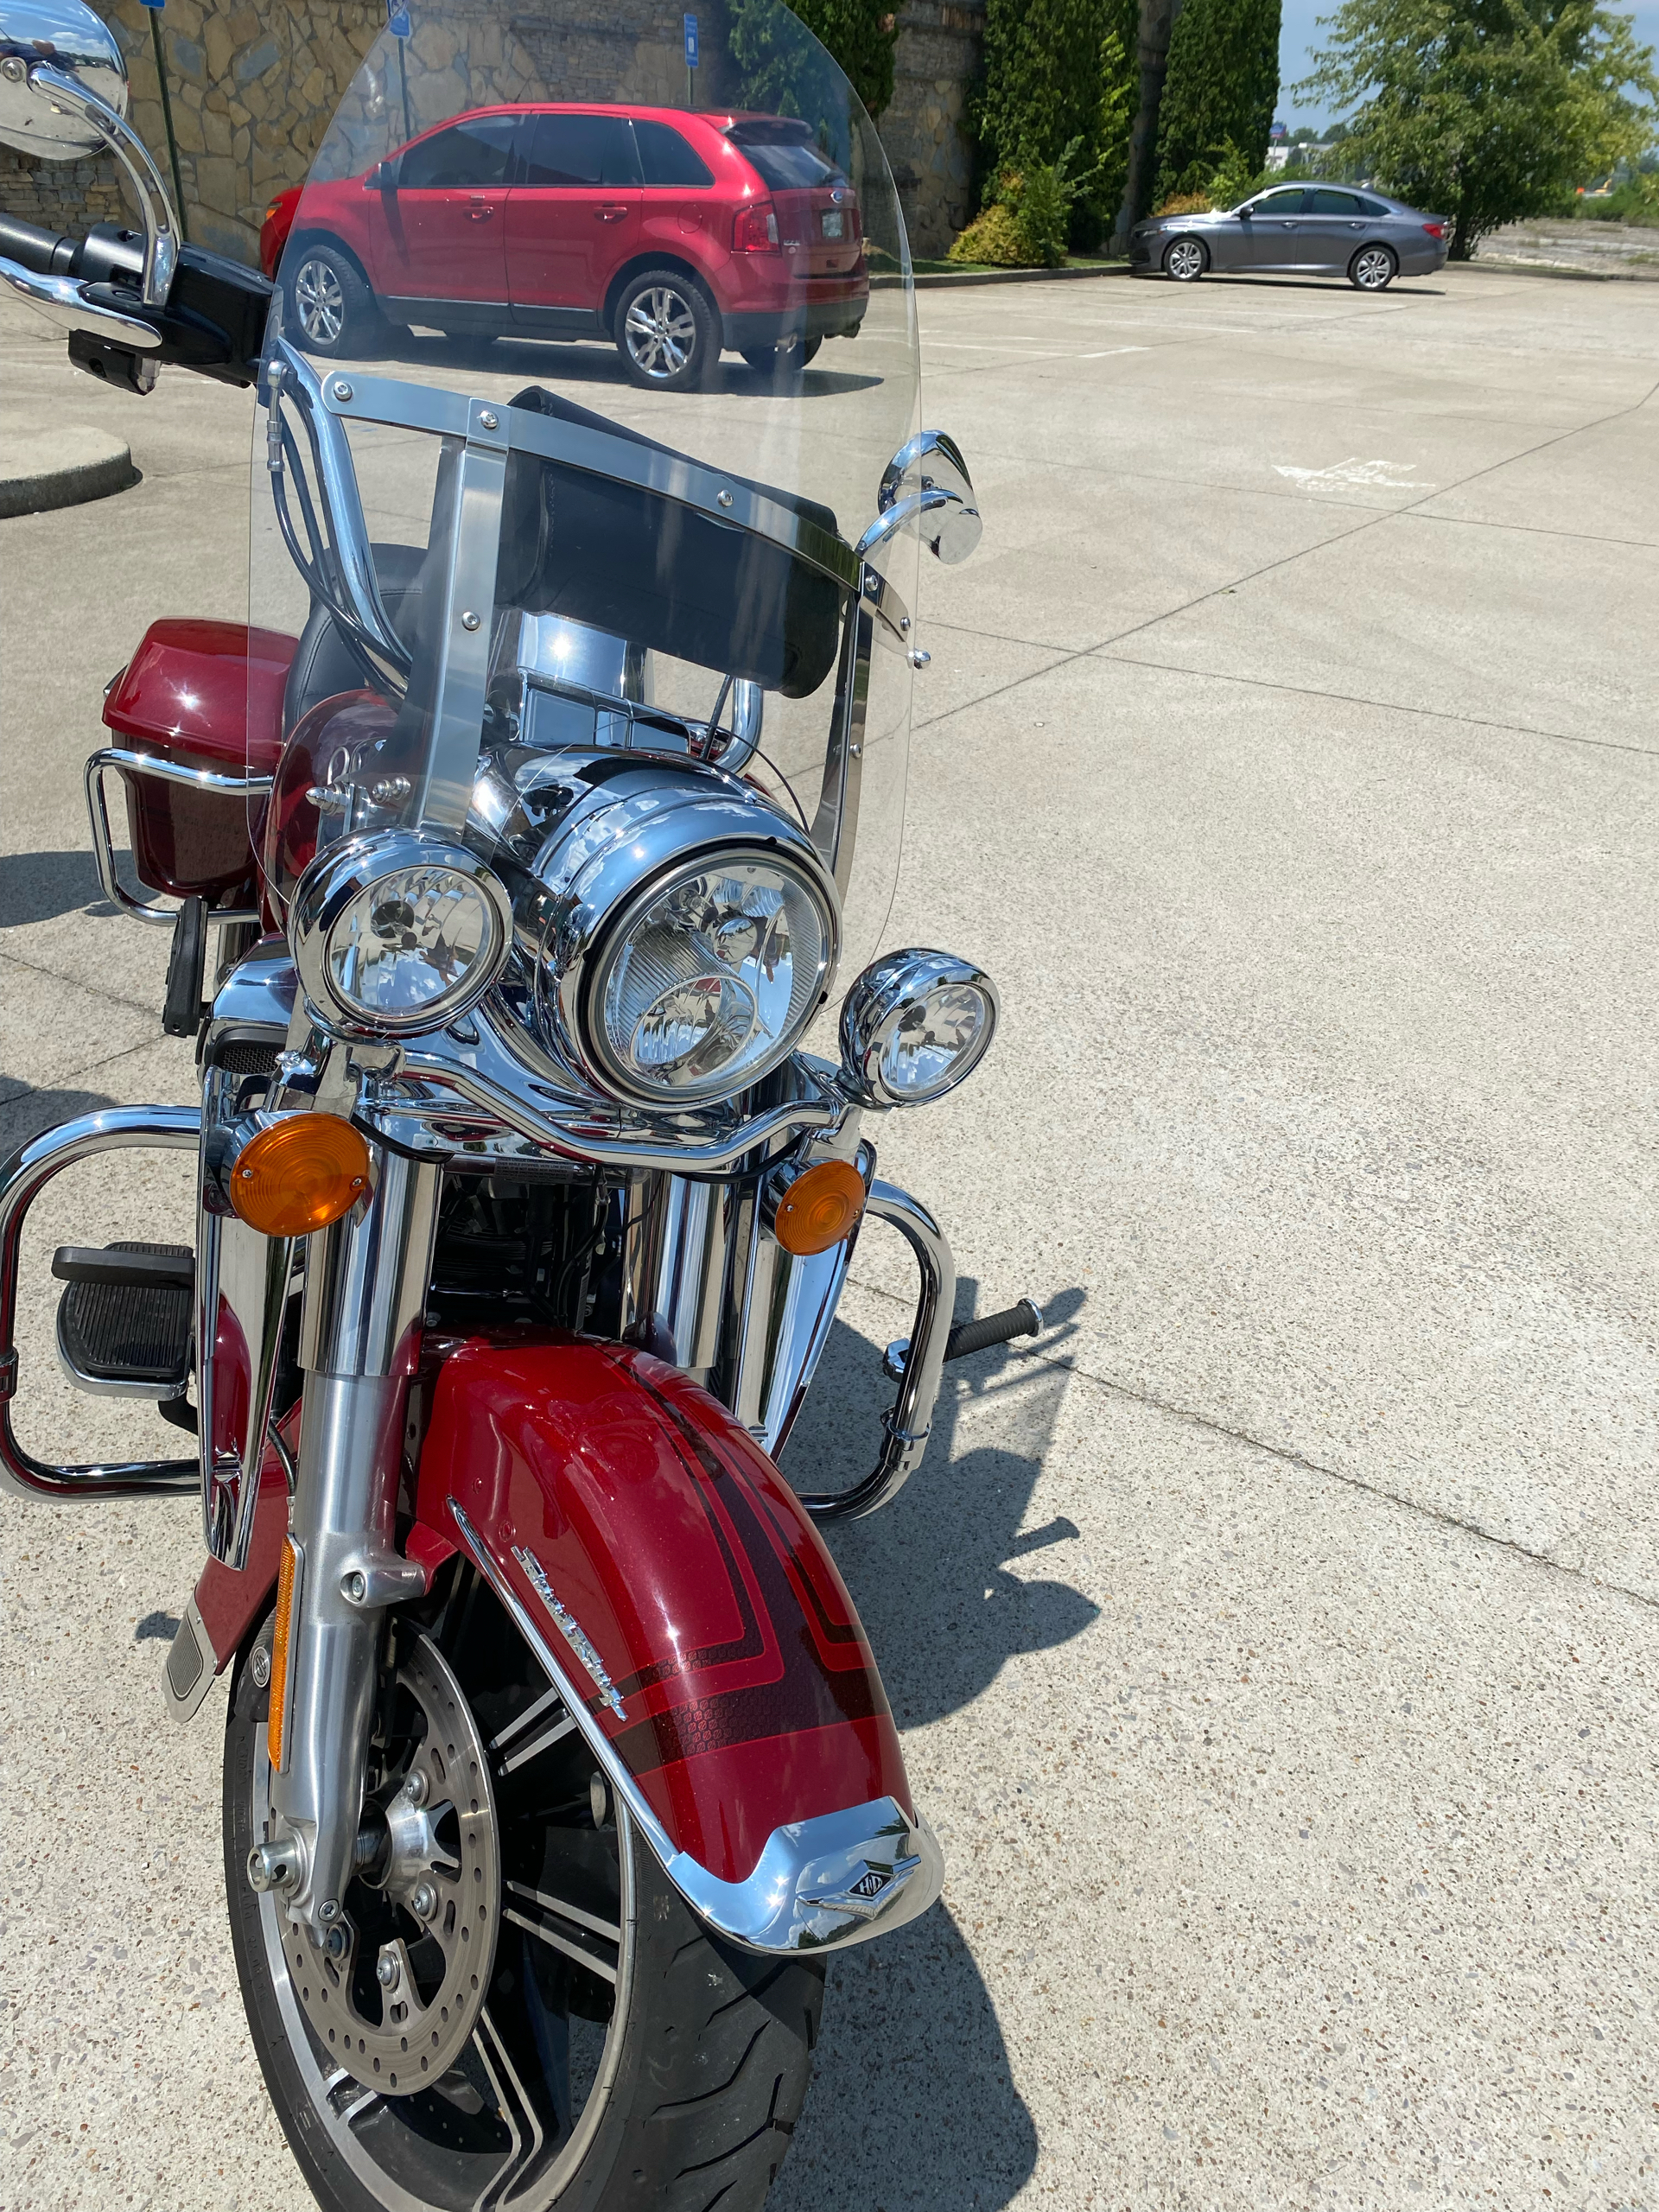 2020 Harley-Davidson FLHR Road King in Columbia, Tennessee - Photo 6